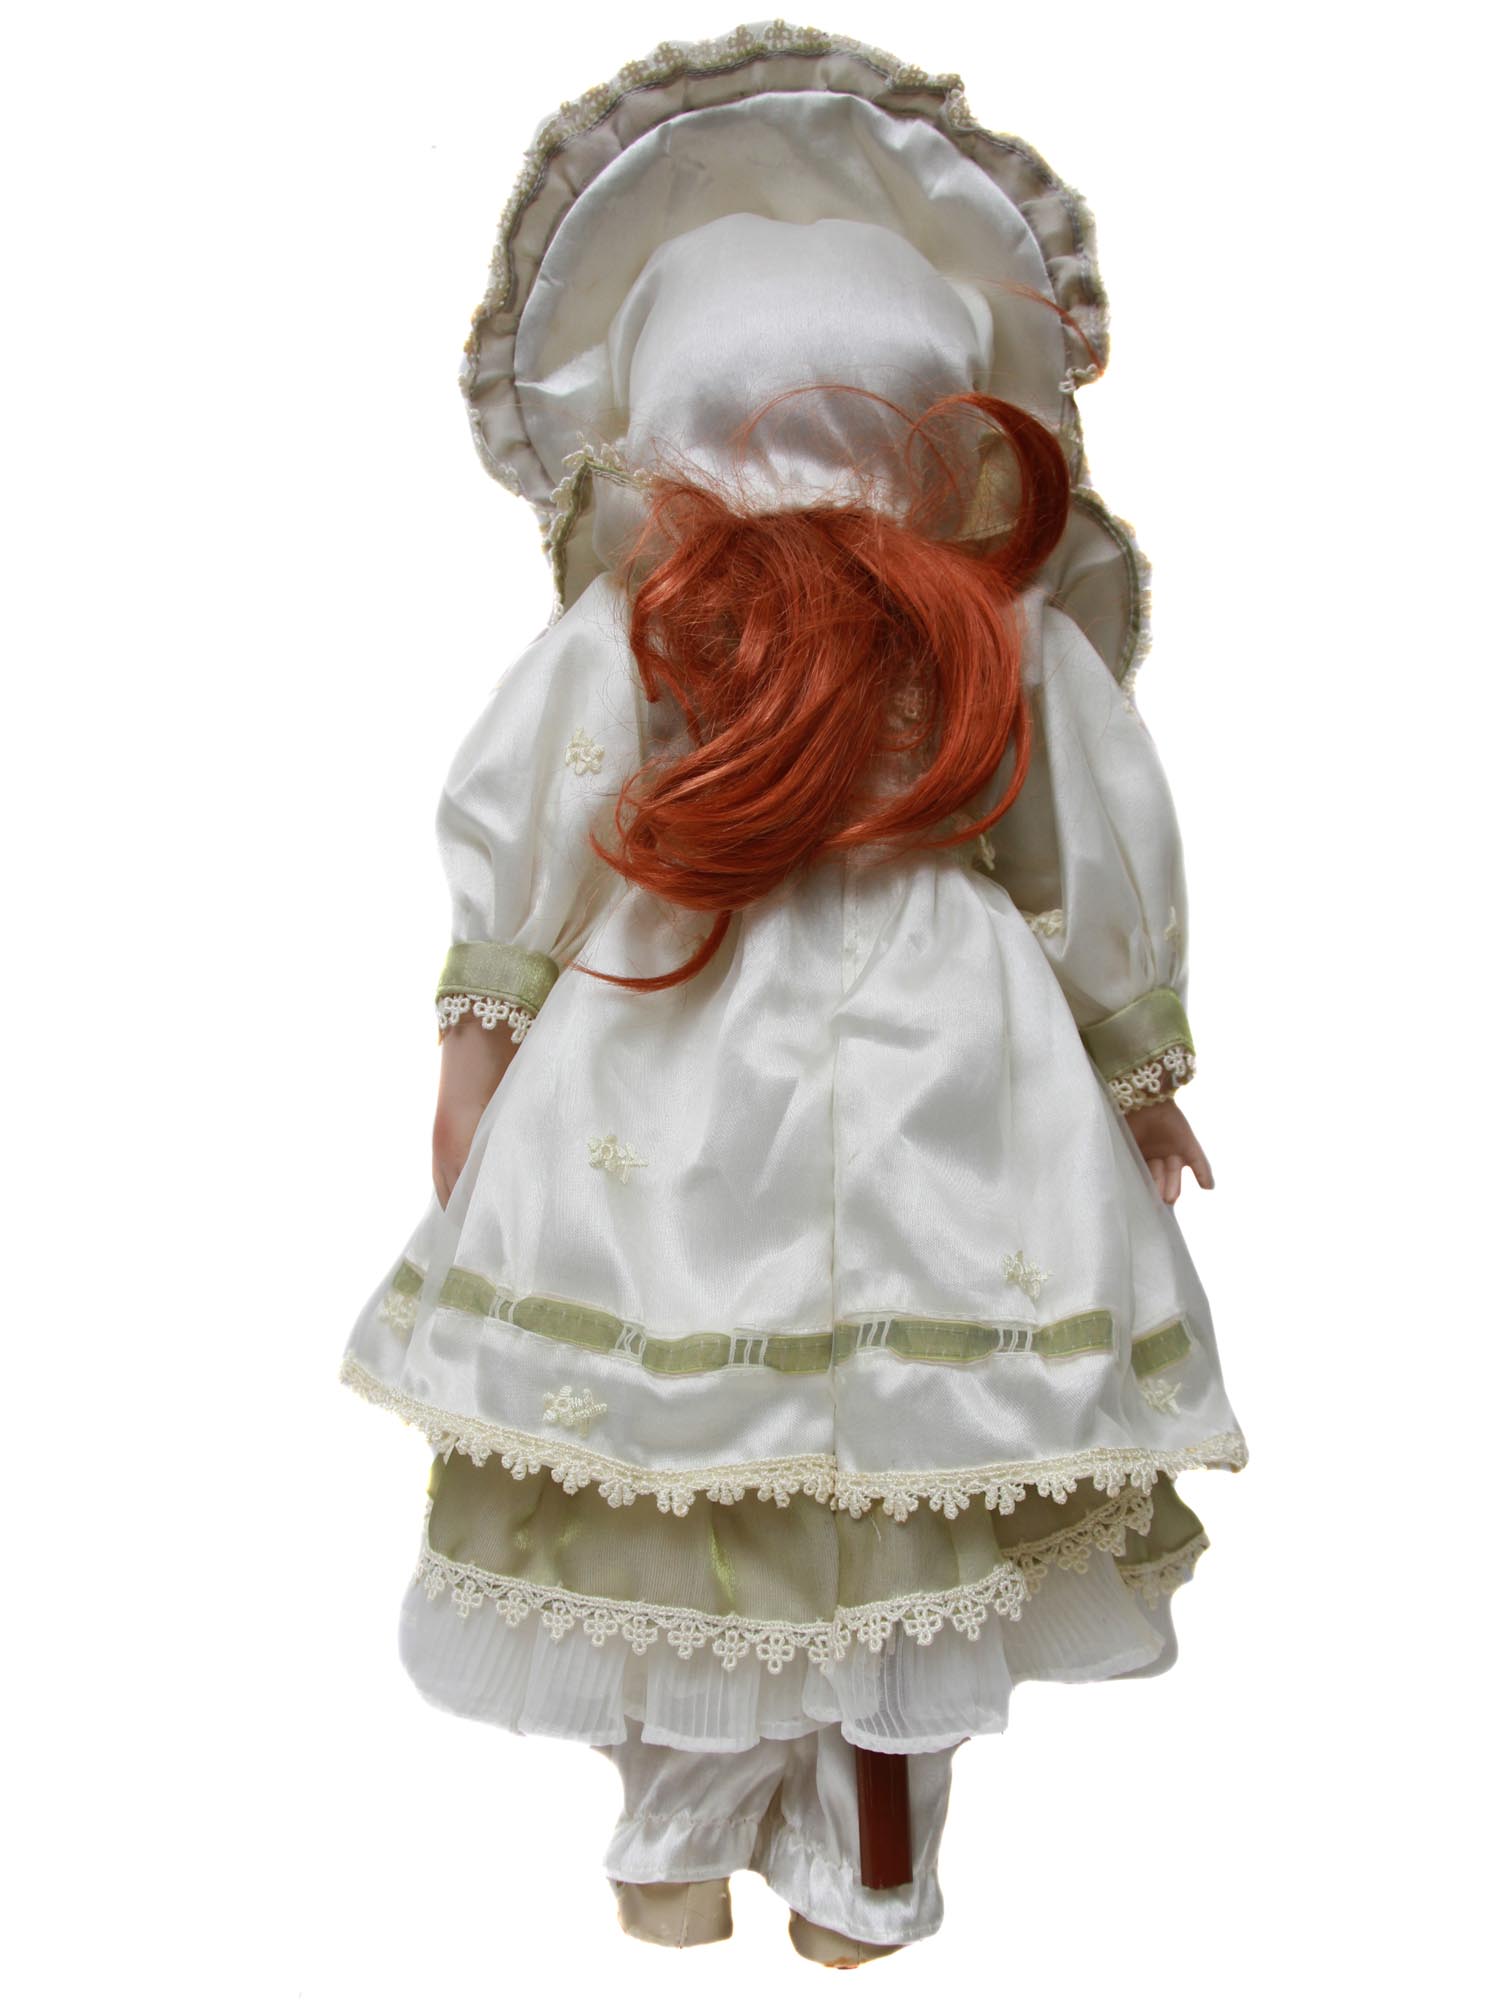 A EUROPEAN BISQUE PORCELAIN RED HAIRED DOLL PIC-1